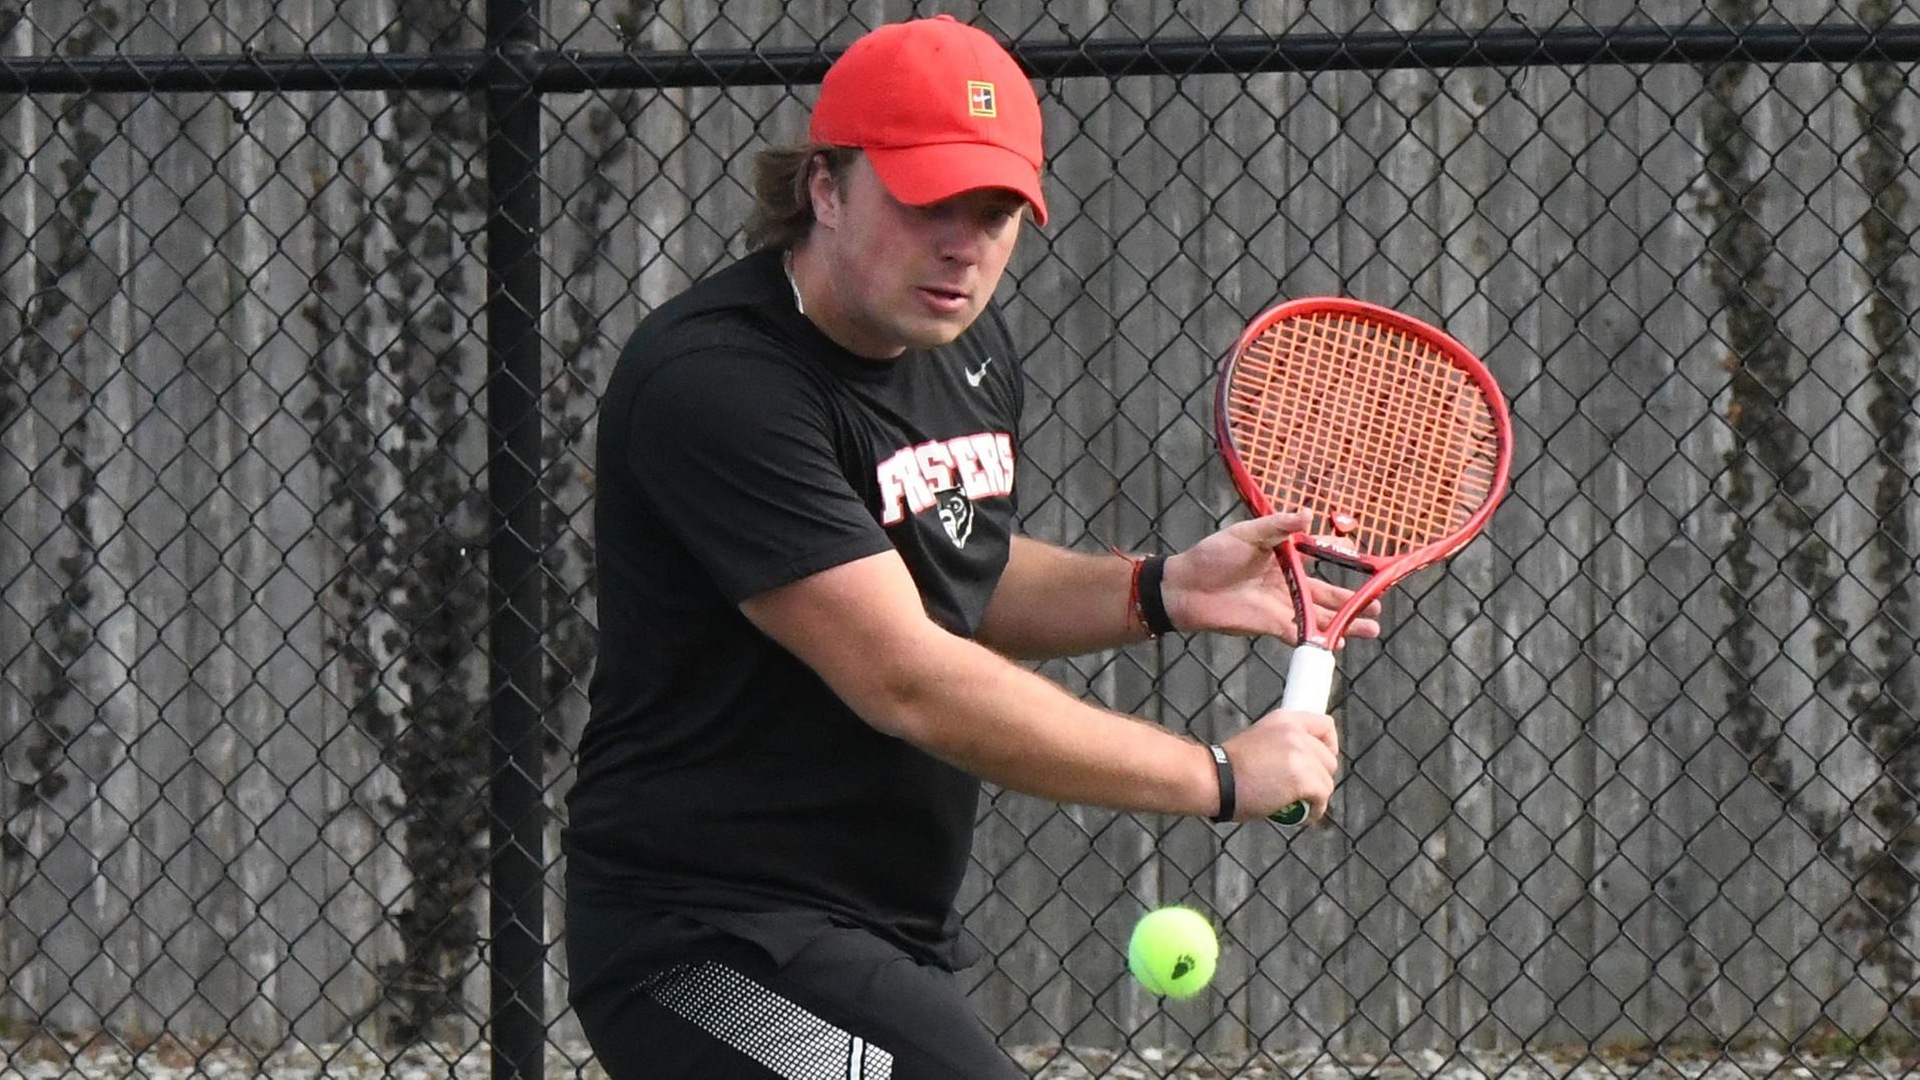 Vyshyvanyuk Wins MWC Title at #1 Singles, Three Other Foresters are Runners-Up